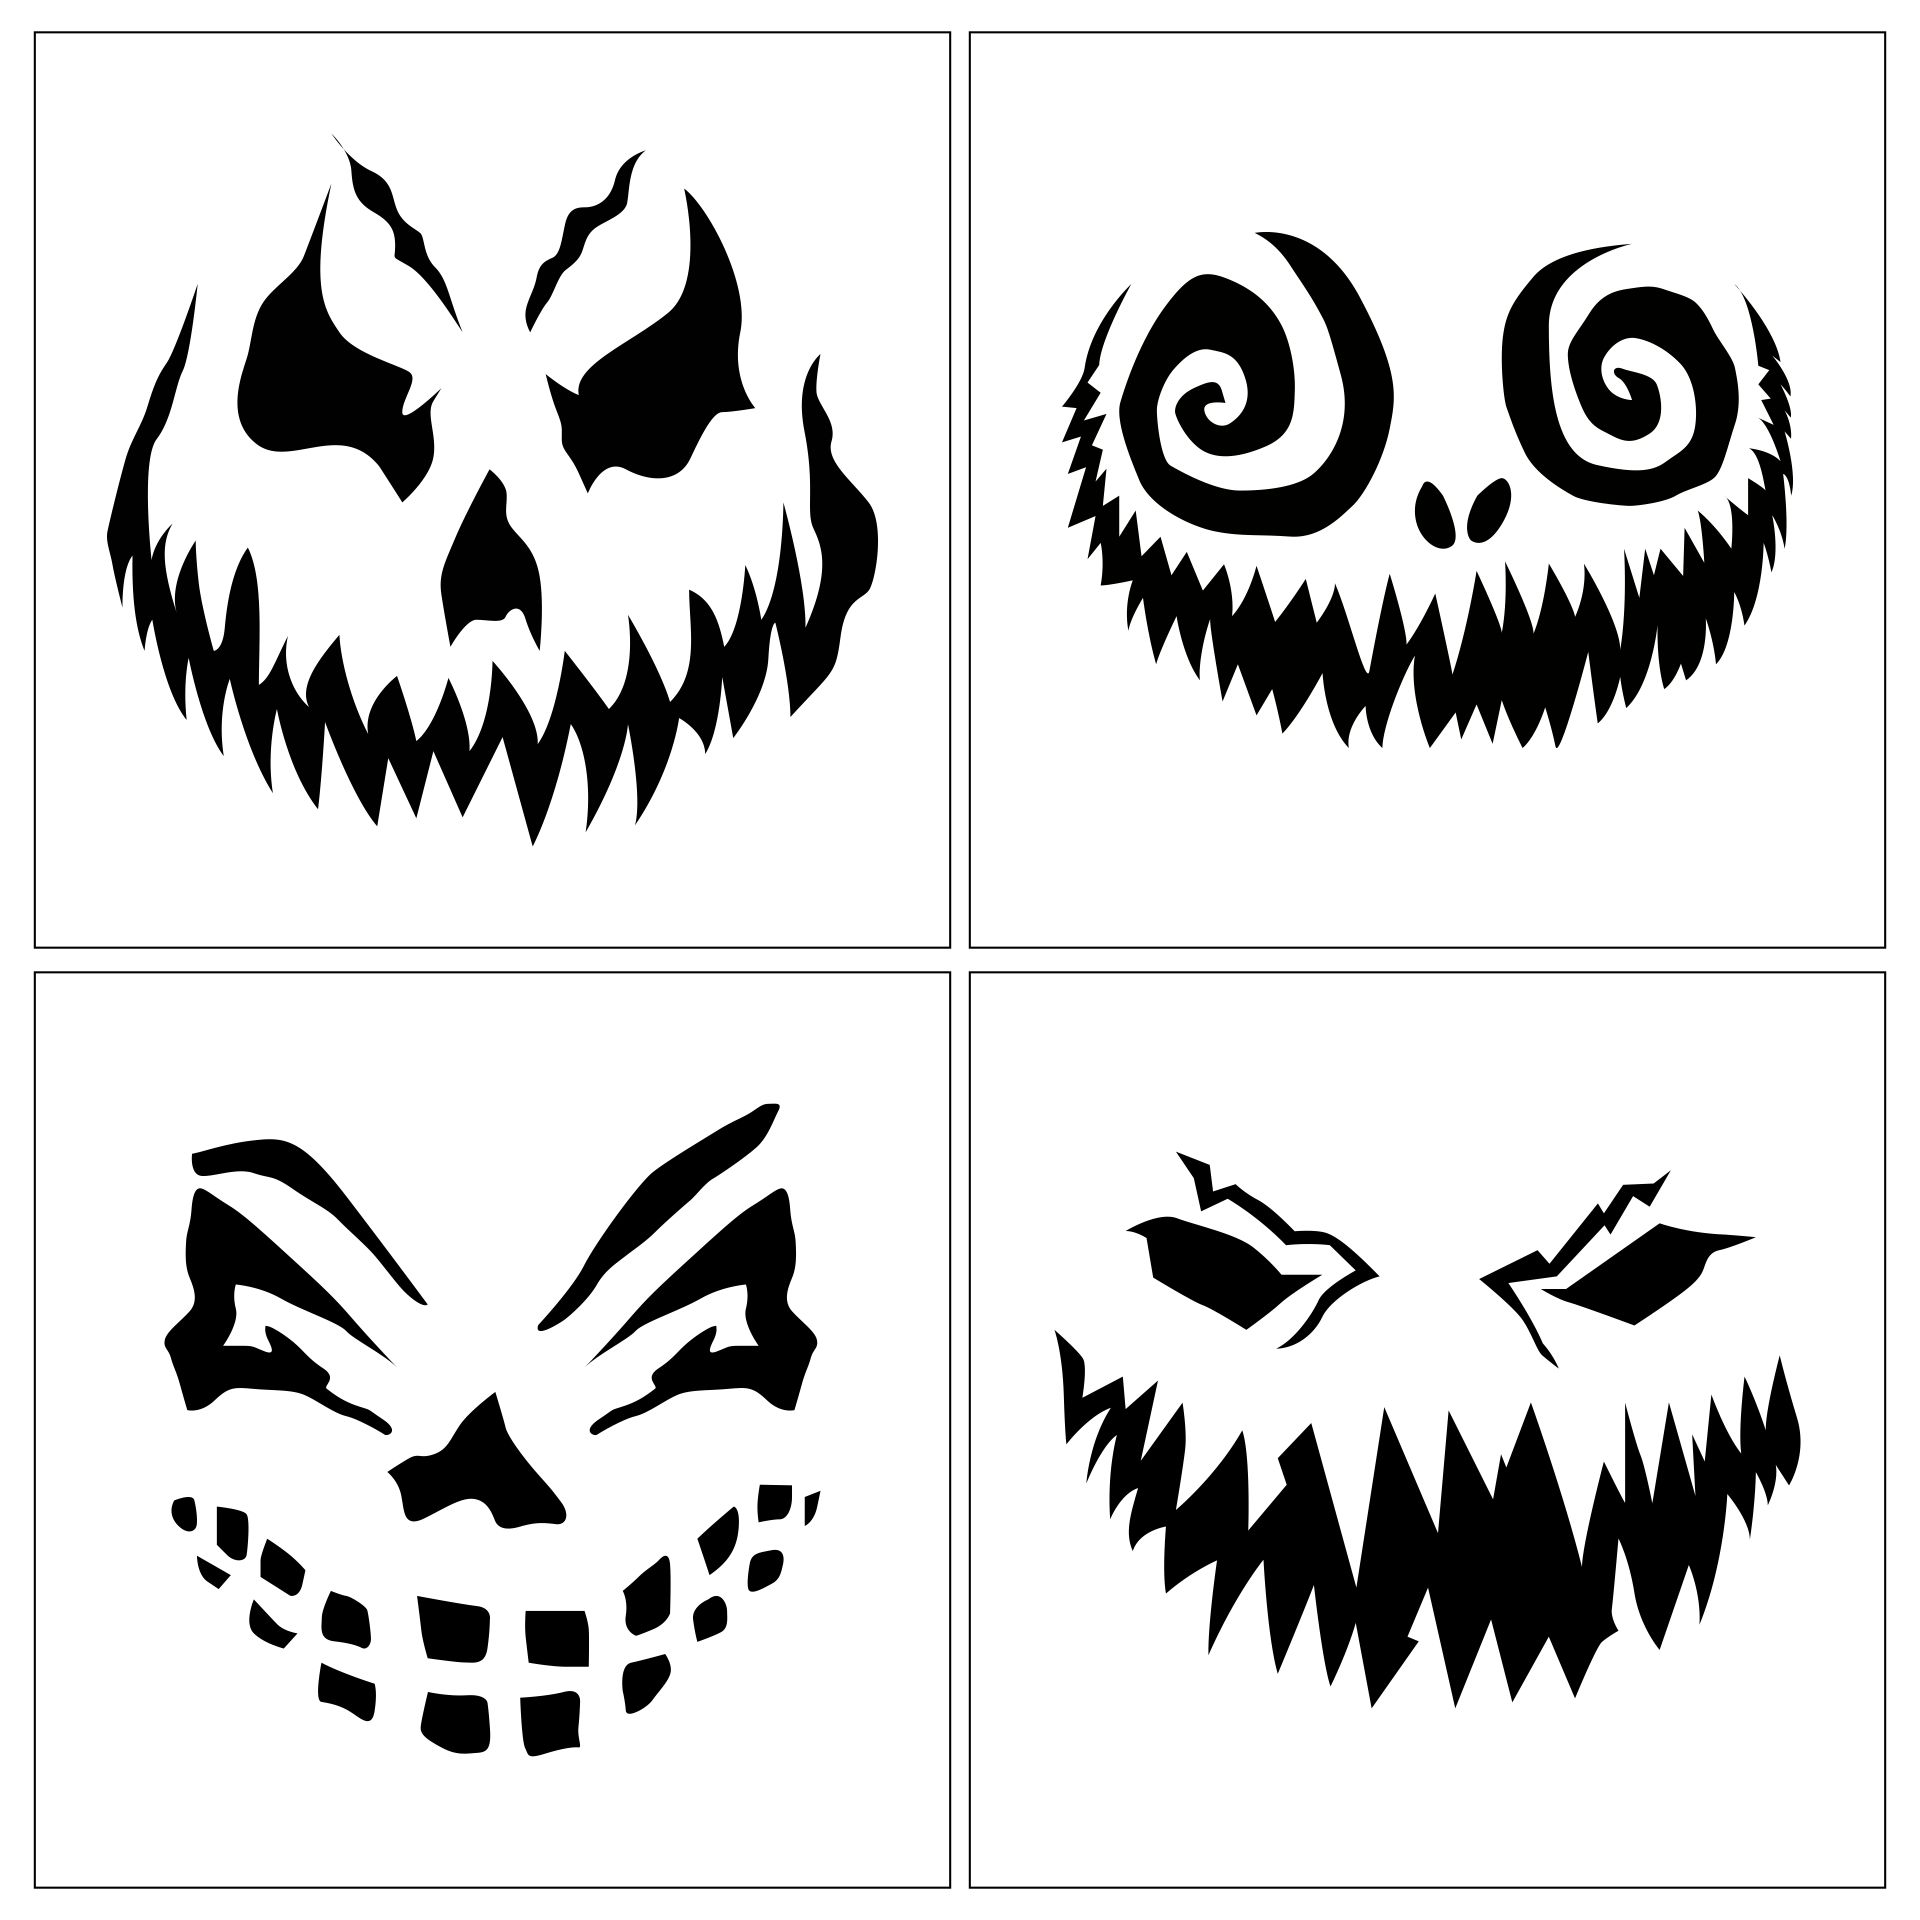 cut-out-printable-halloween-templates